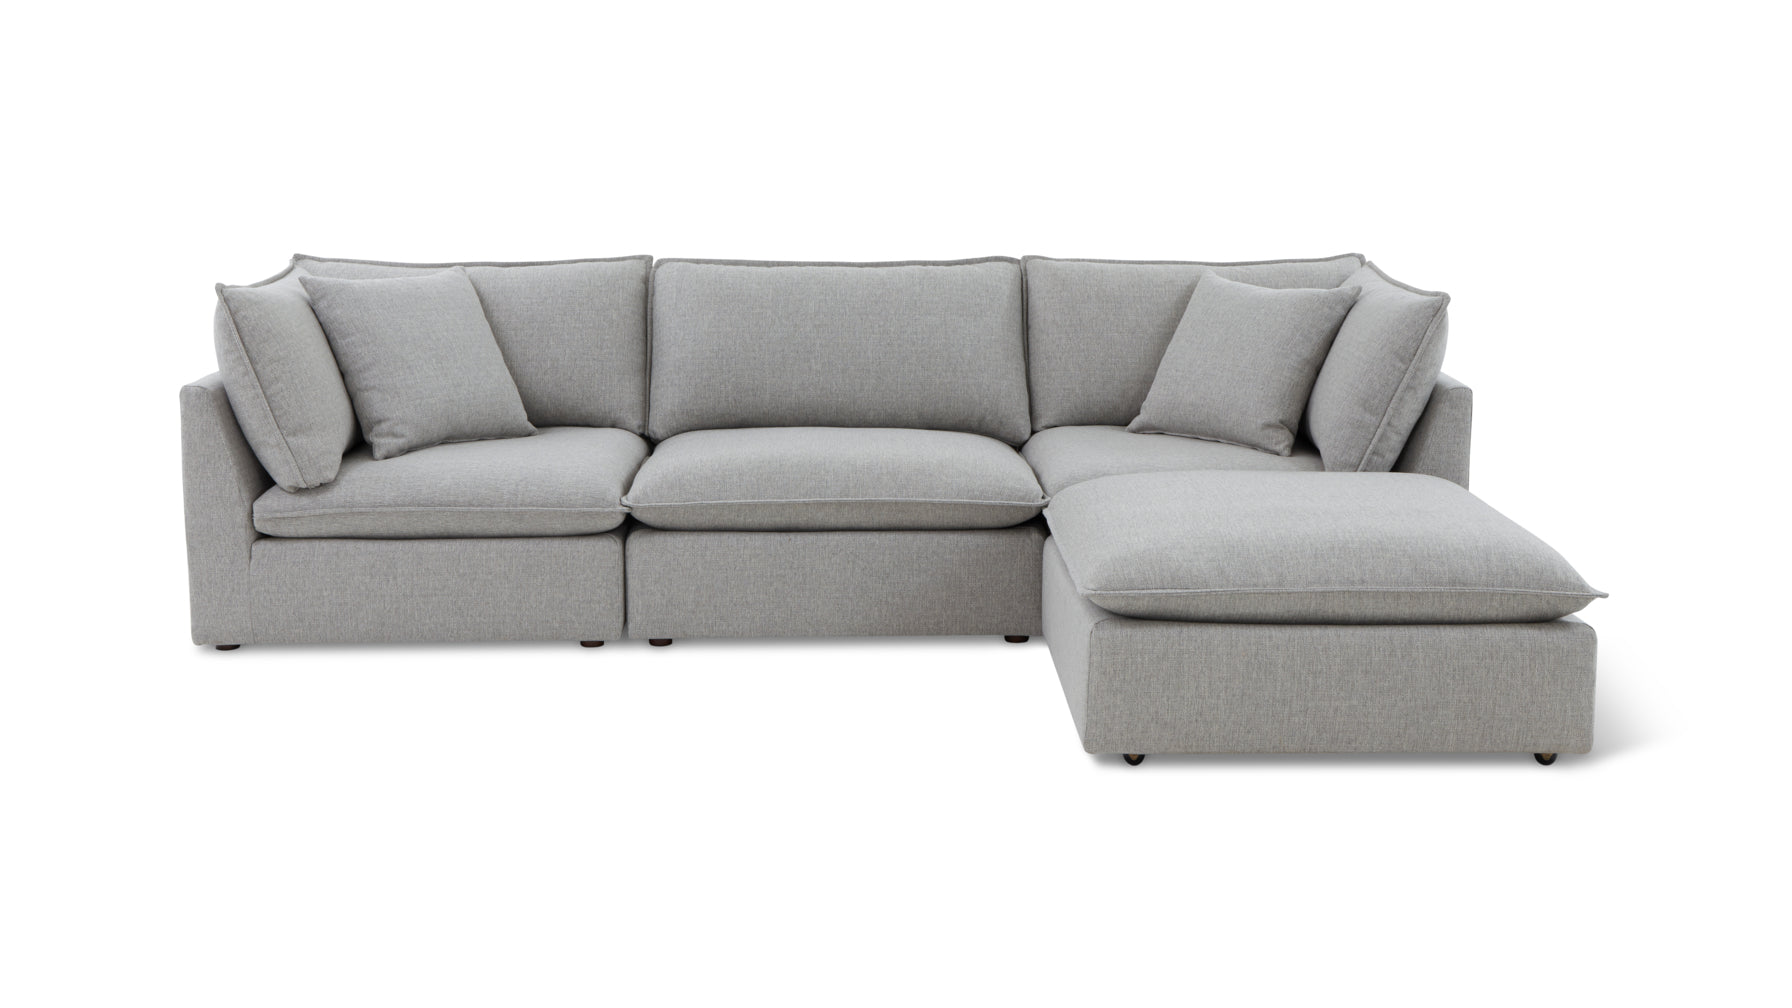 Chill Time 4-Piece Modular Sectional, Heather - Image 1